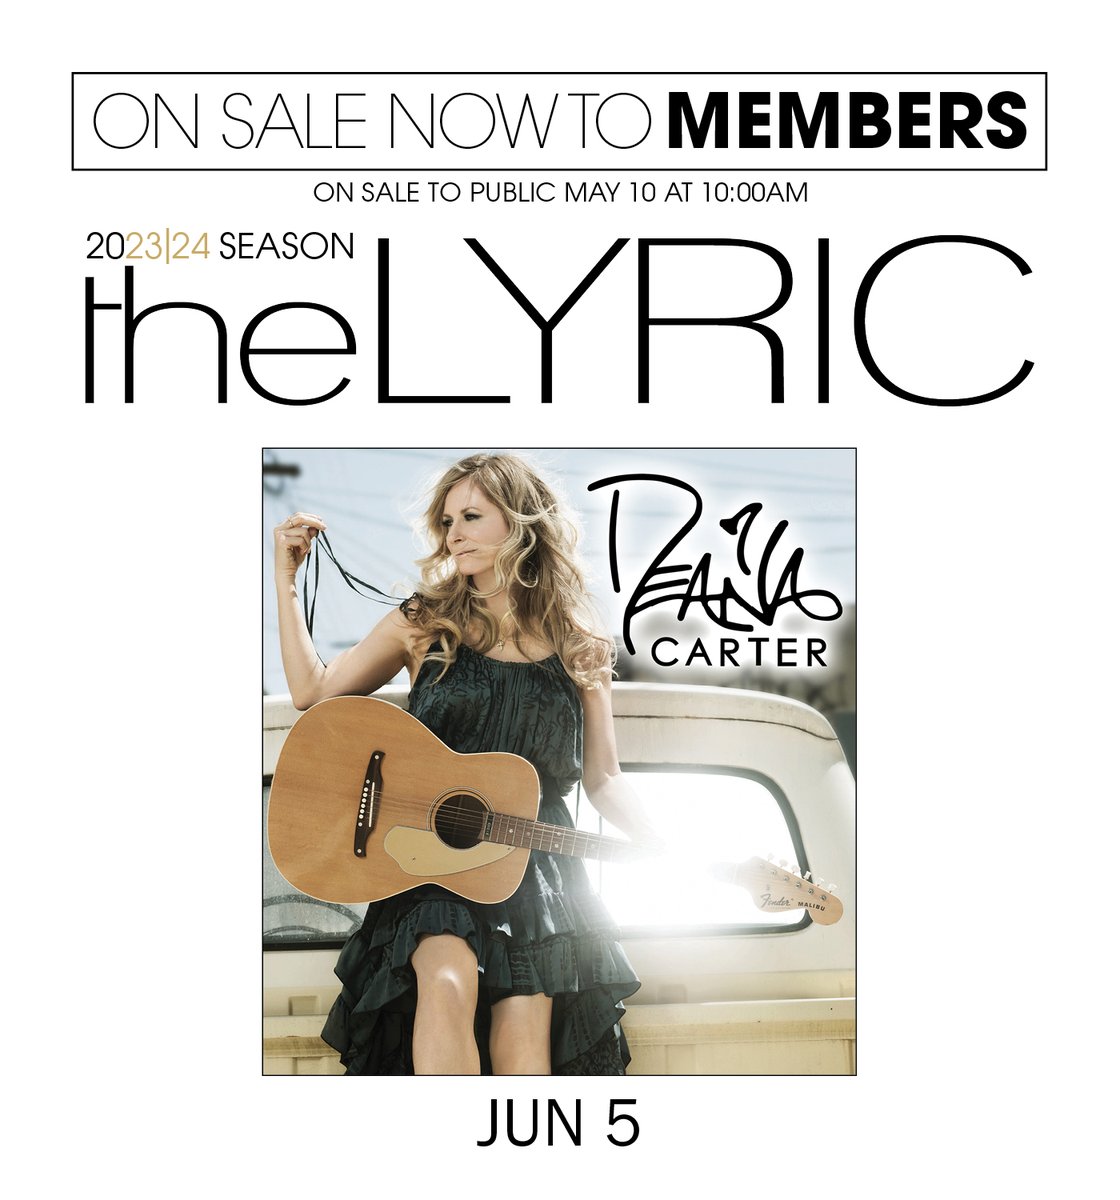 Tickets On Sale NOW to Lyric Members Enjoy the PERKS - Get the Best Seats and More To Become a Member Today call Heather Long, Development Director at 772-220-1942 ext 209 Tickets are available to the public on May 10th. An Evening with Deana Carter ~ June 5, 2024 at 7:00PM